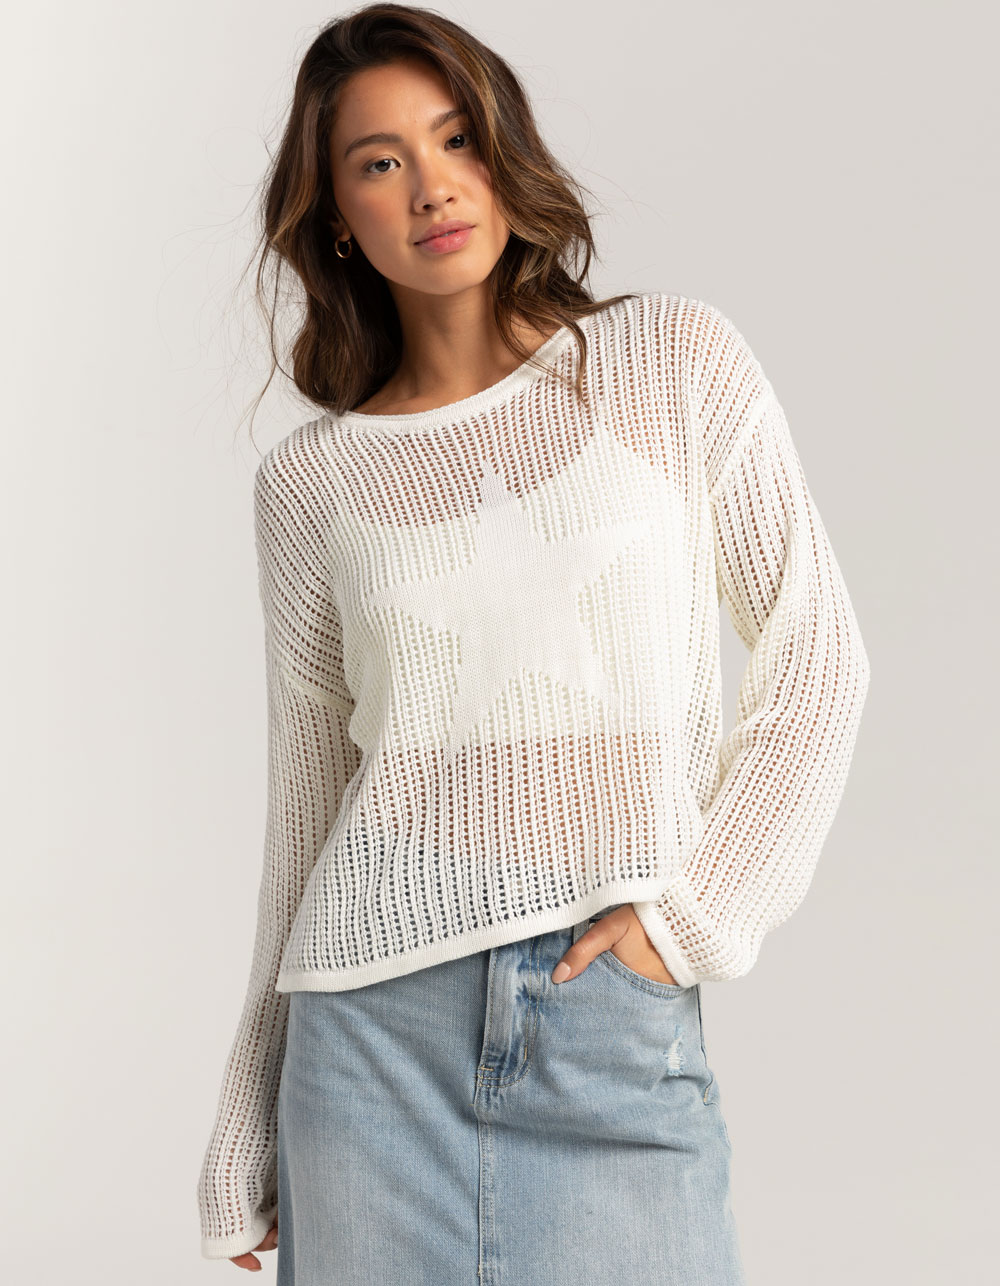 NO COMMENT Star Open Weave Womens Sweater